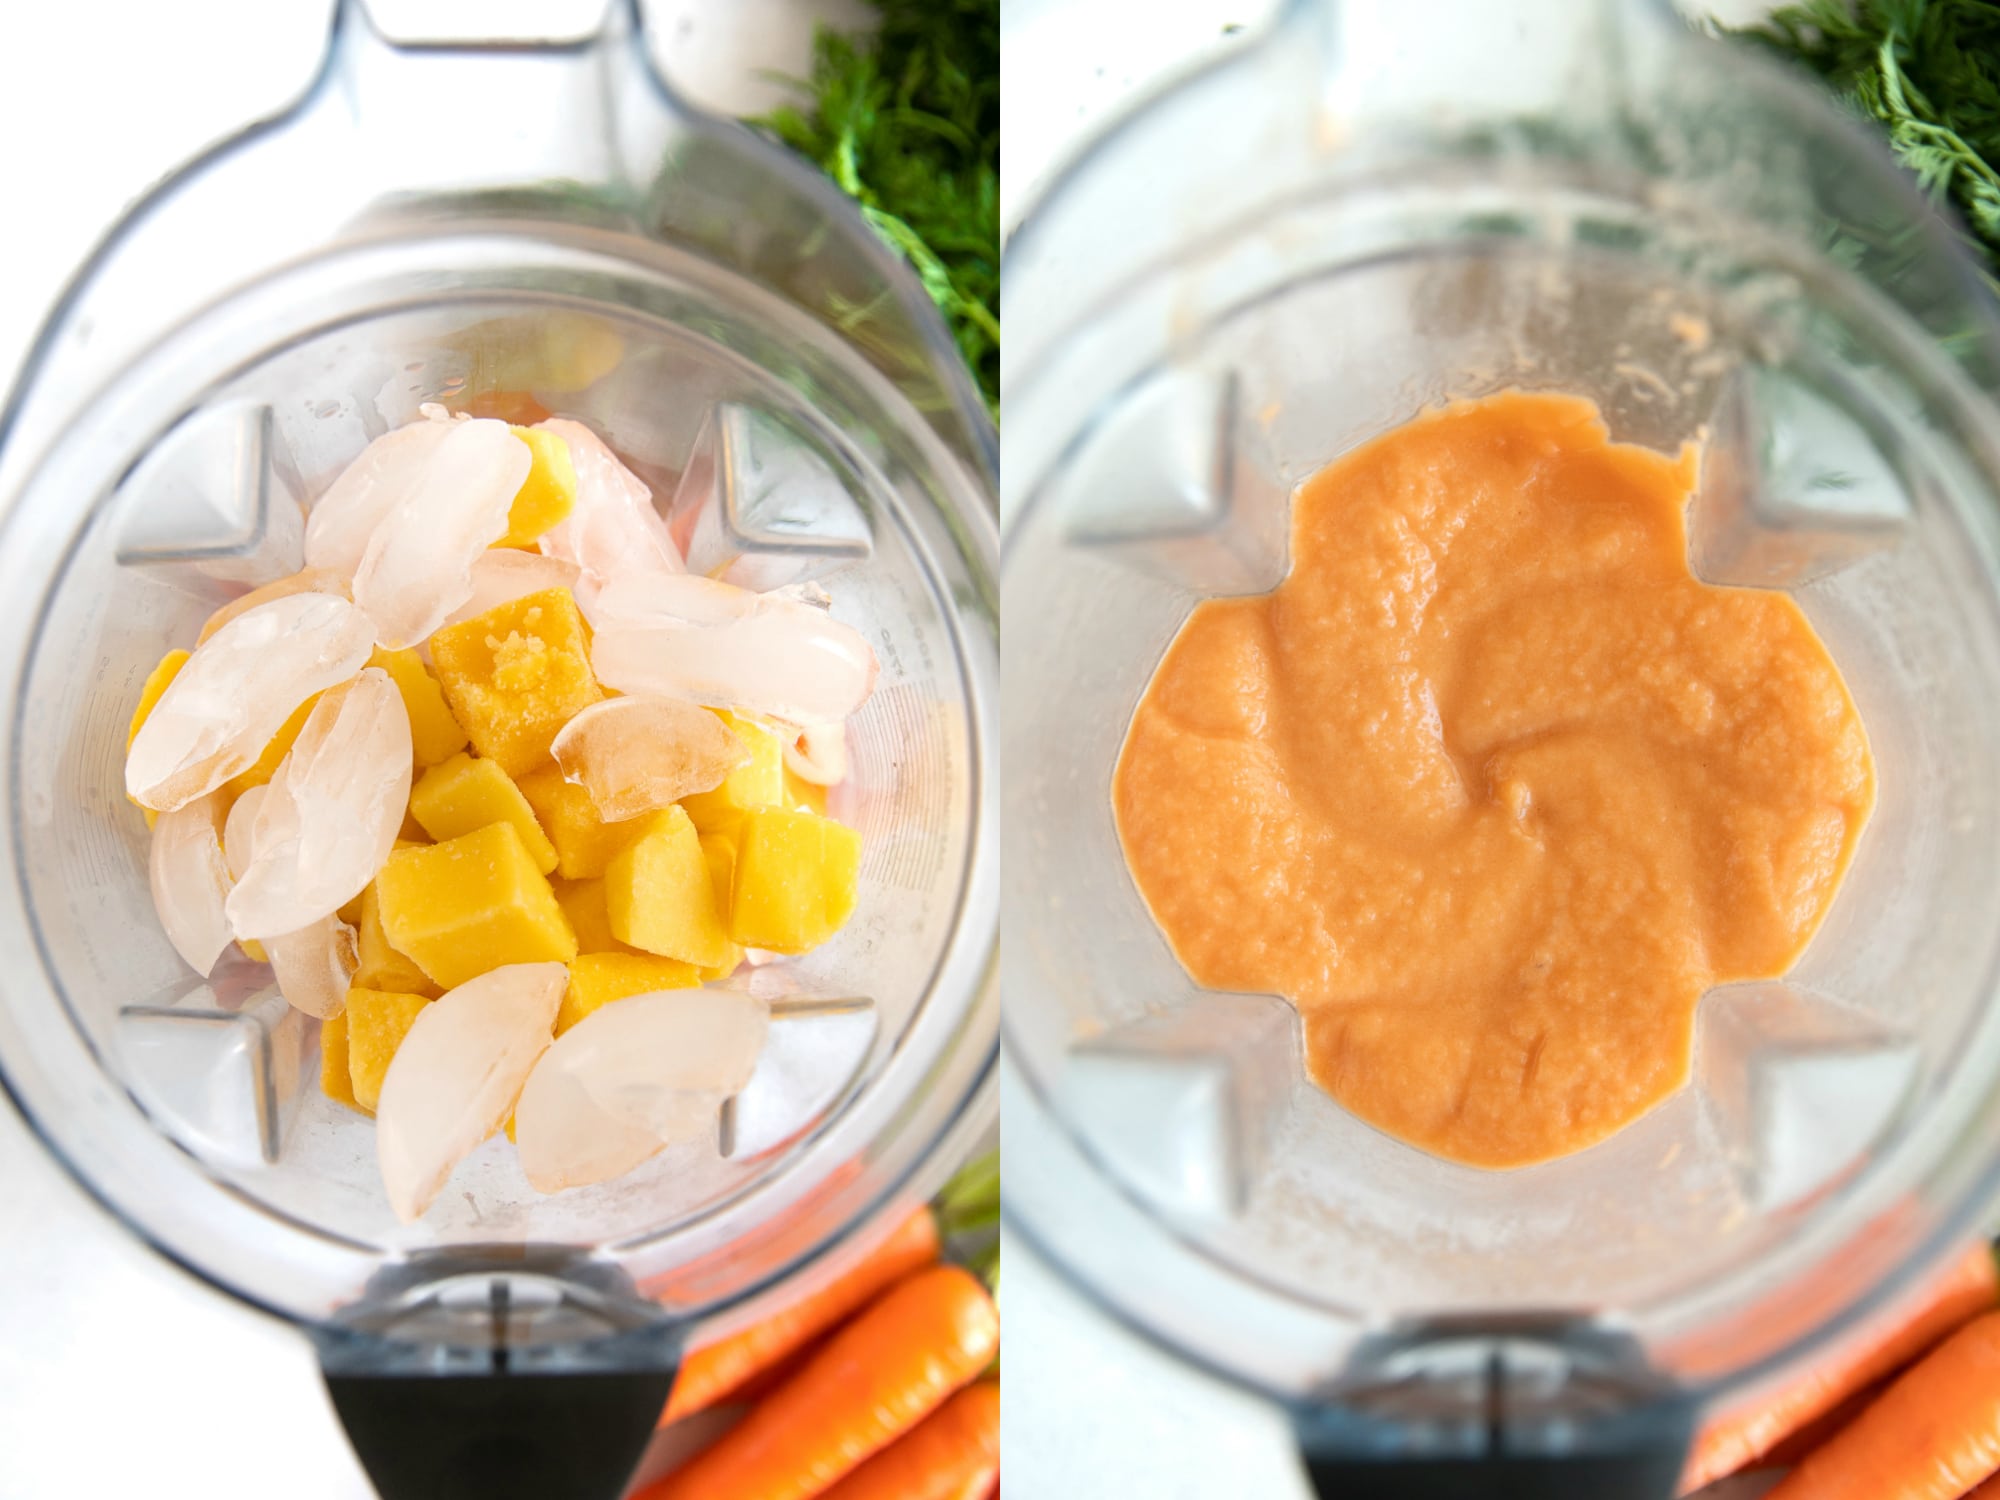 Blending a tropical carrot smoothie in a blender.